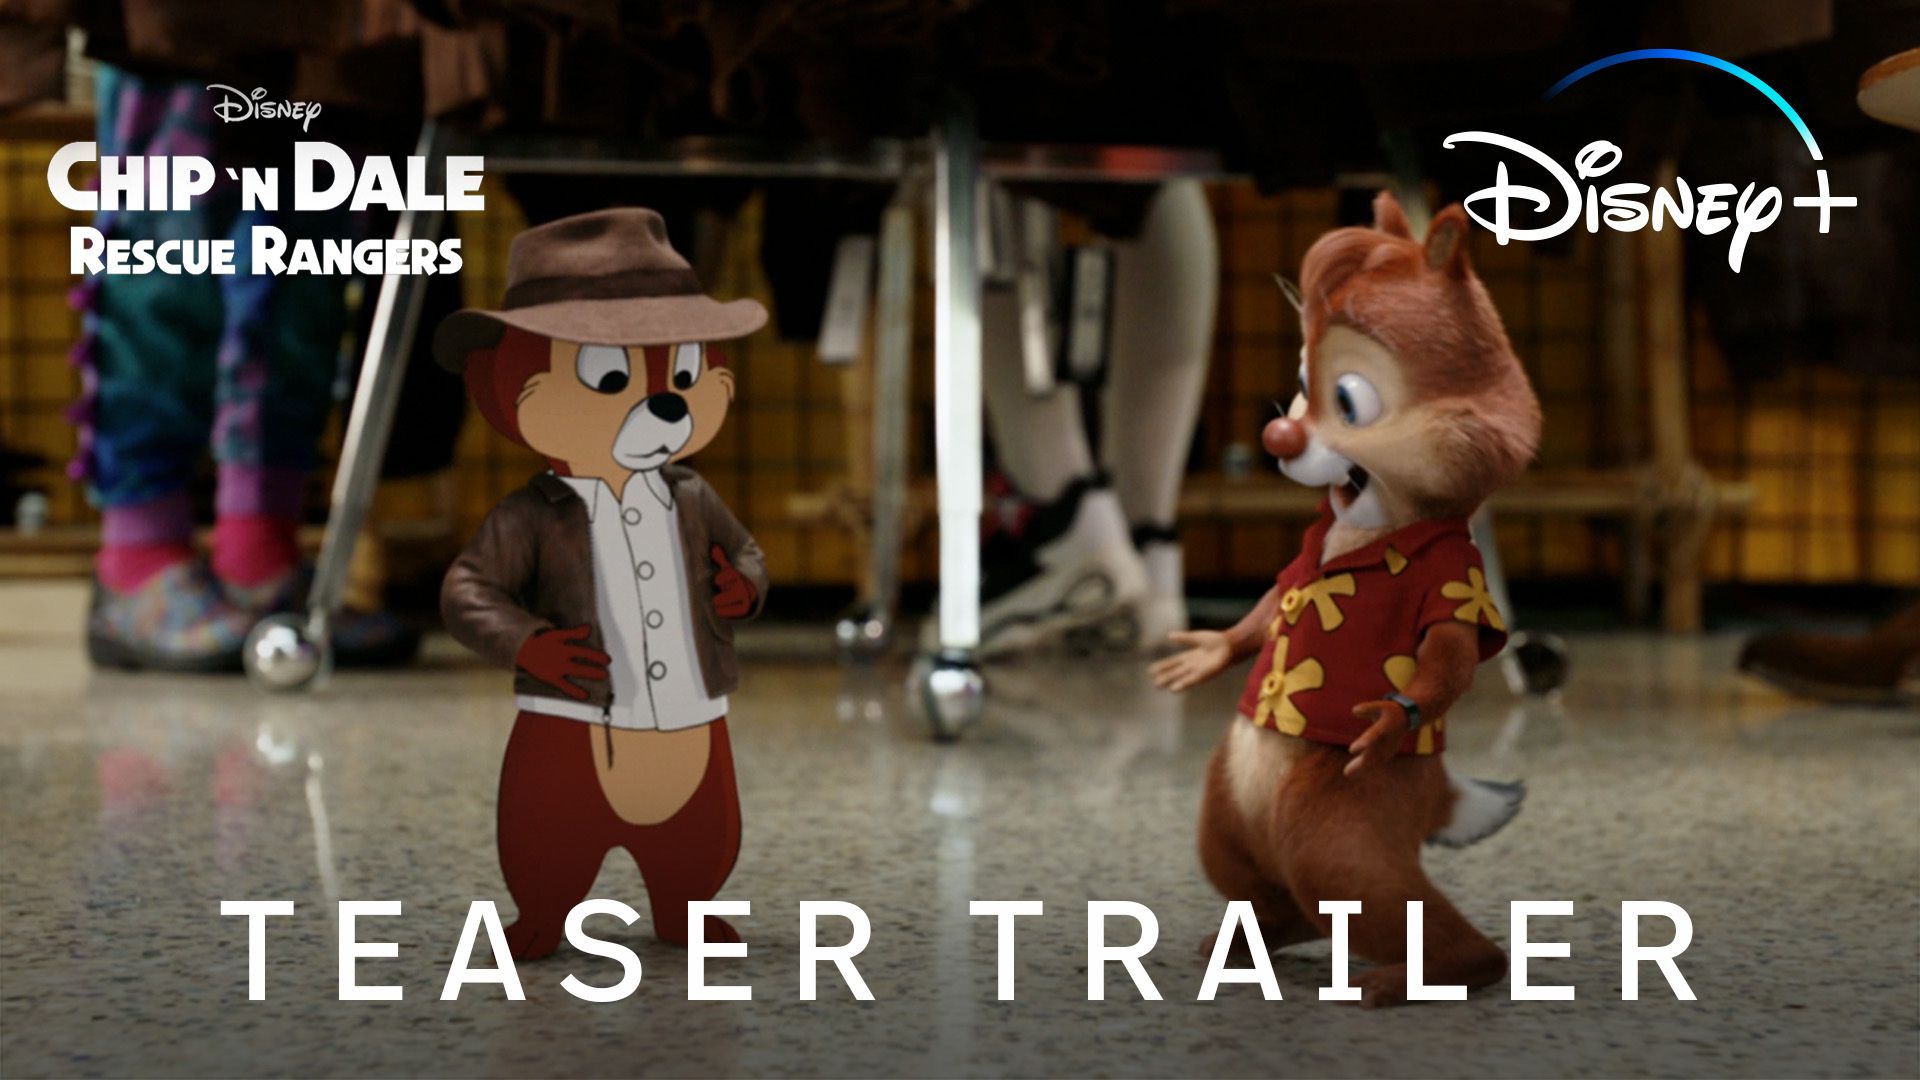 CHIP 'N DALE RESCUE RANGERS